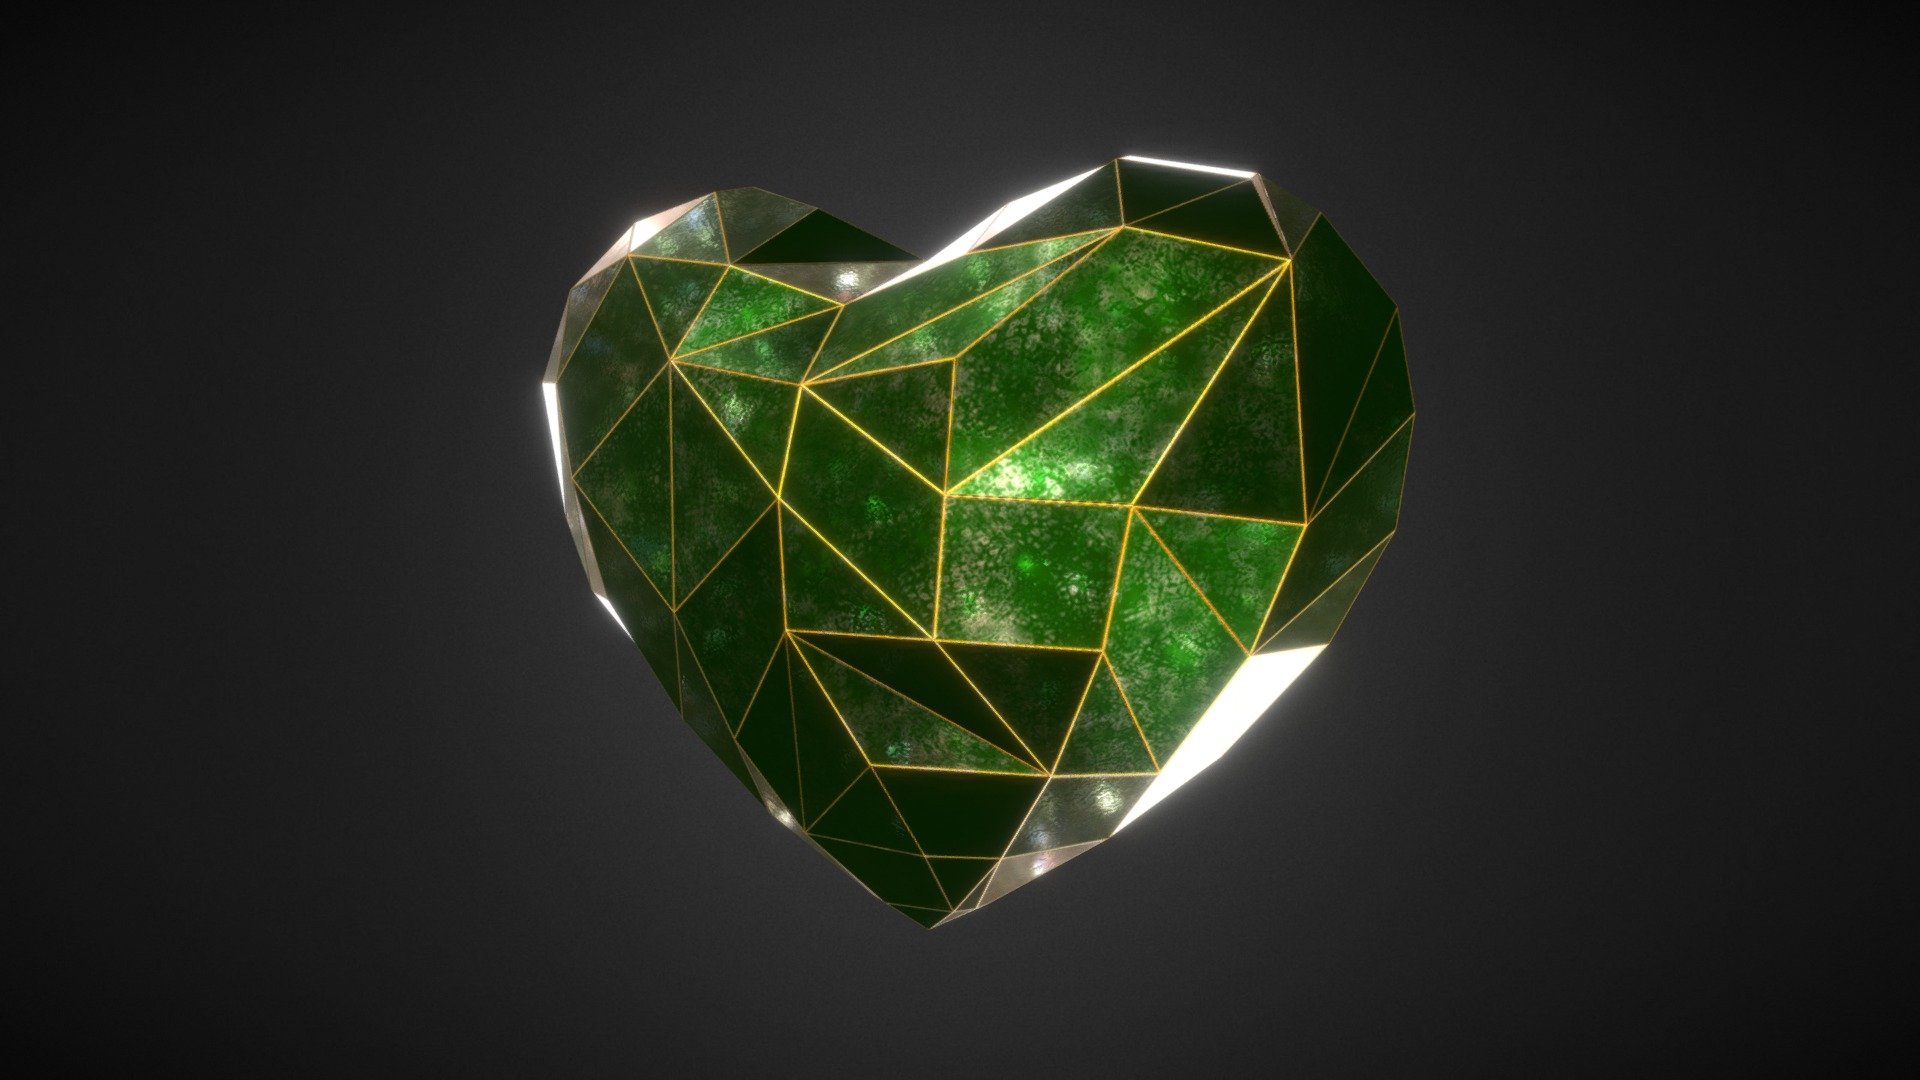 Galaxies Heart
ColorMap + NormalMap 2048x2048
Format FBX file size : 30KB

Click on the link to see more models : https://sketchfab.com/GbehnamG/store

If you need customized 3d models , feel free to contact at: mr.gbehnamg@yahoo.com - Green Crystal Heart - Buy Royalty Free 3D model by BehNaM (@GbehnamG) 3d model